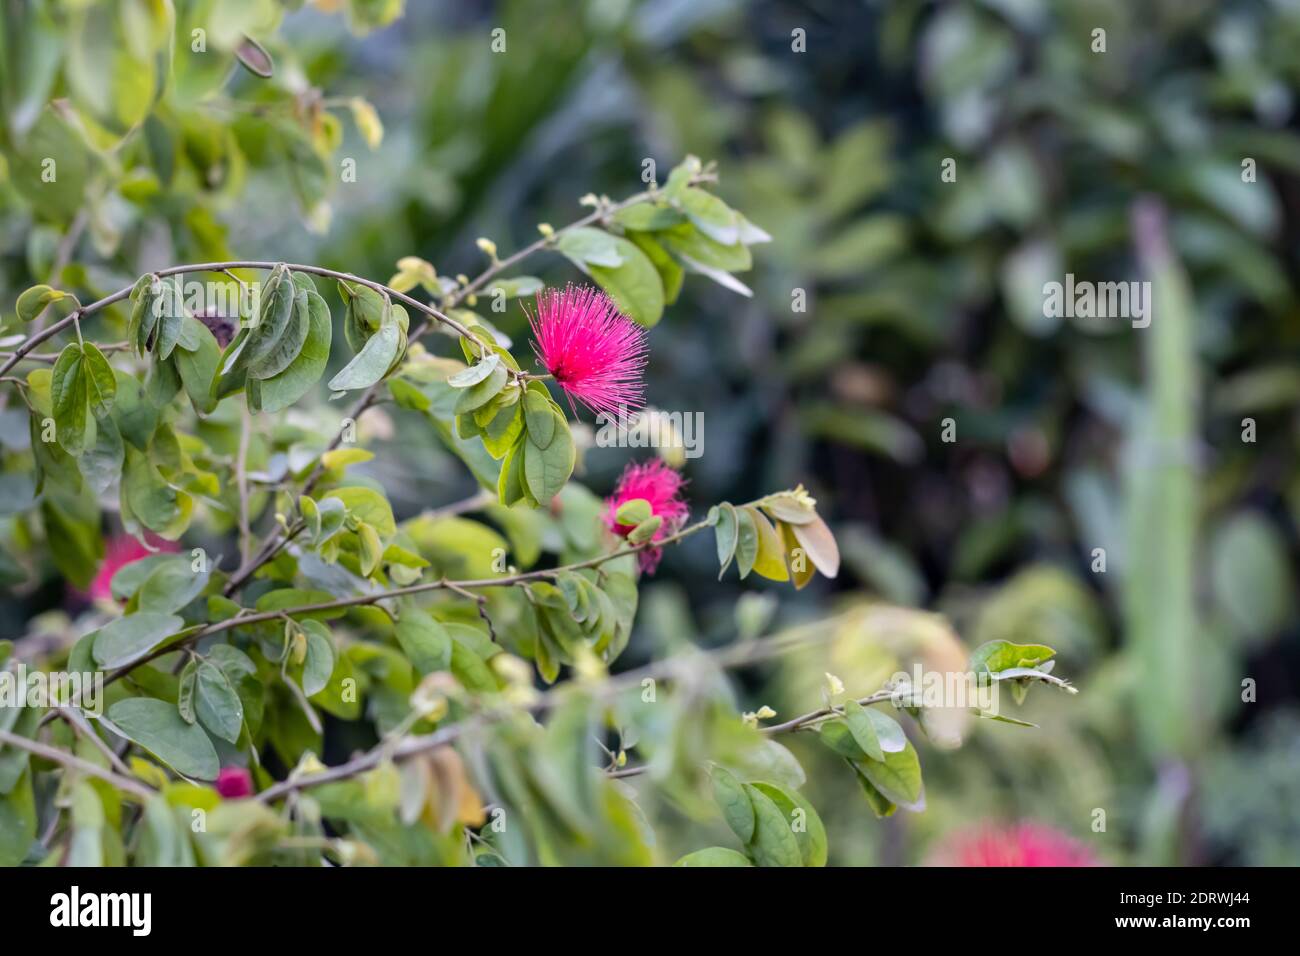 Bloomed flowers of Mimosa tree or Silk tree with branches and green leaves in the jungle Stock Photo